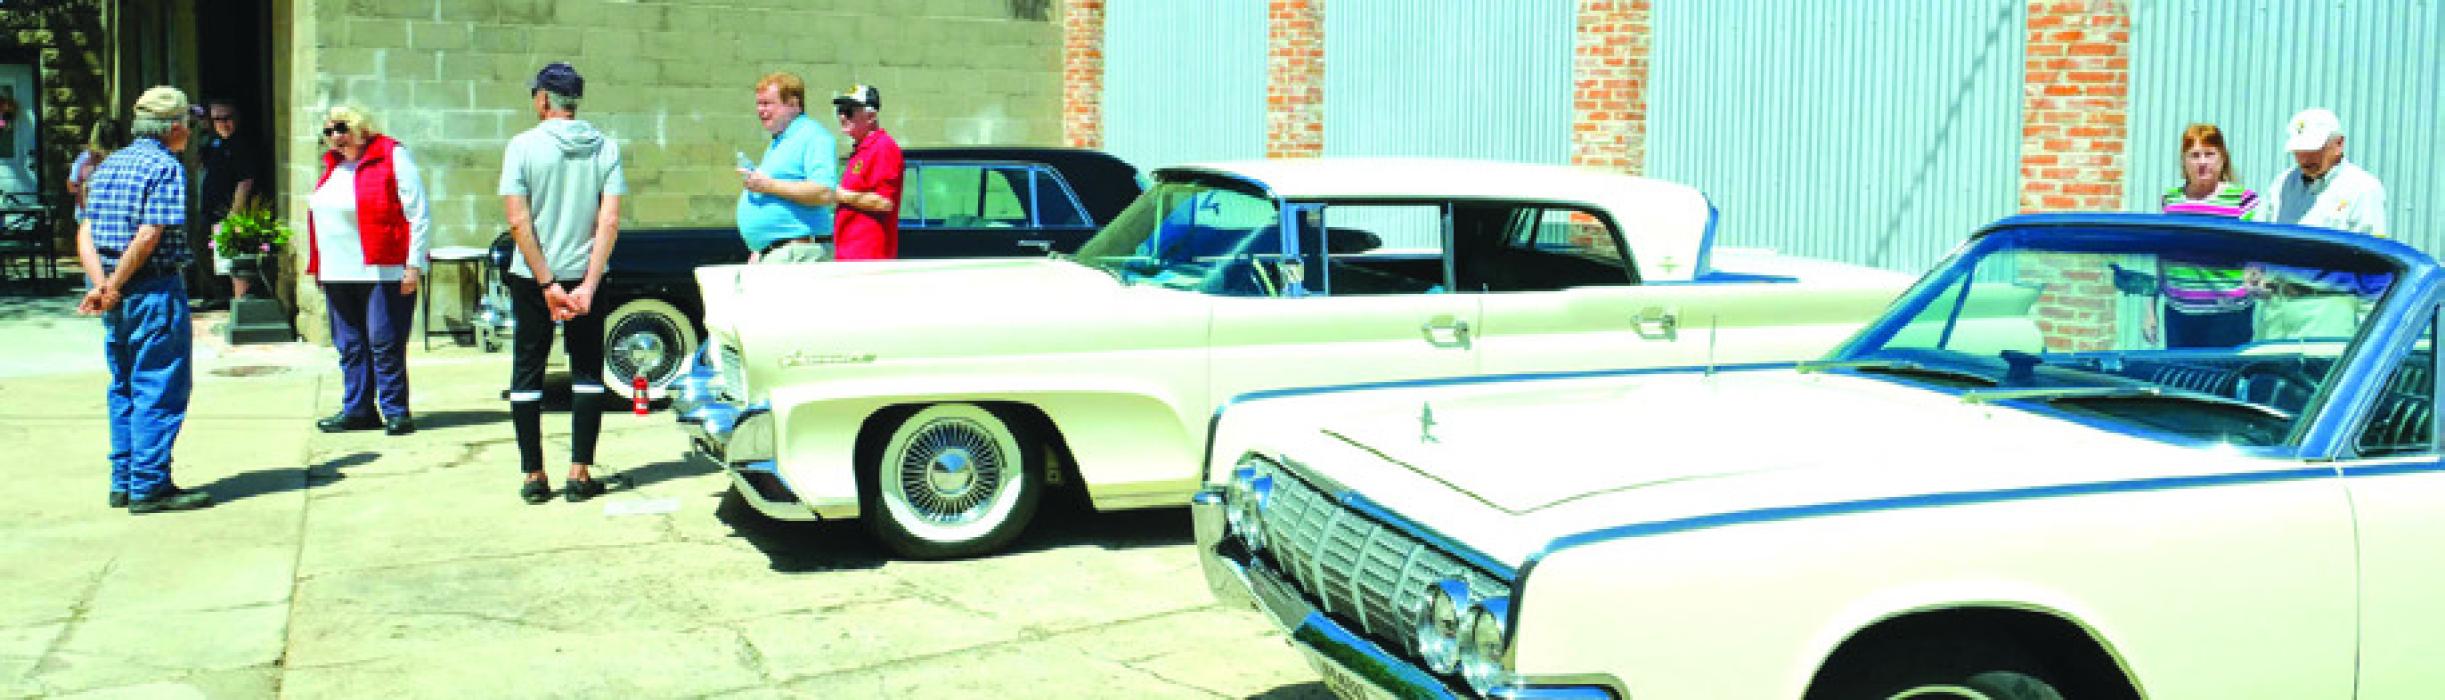 Attendees enjoyed looked at and chatting about the featured cars at the 33rd Annual All Texas Regional Meet of the Lincoln and Continental Owners Club in La Grange on Saturday, April 22.